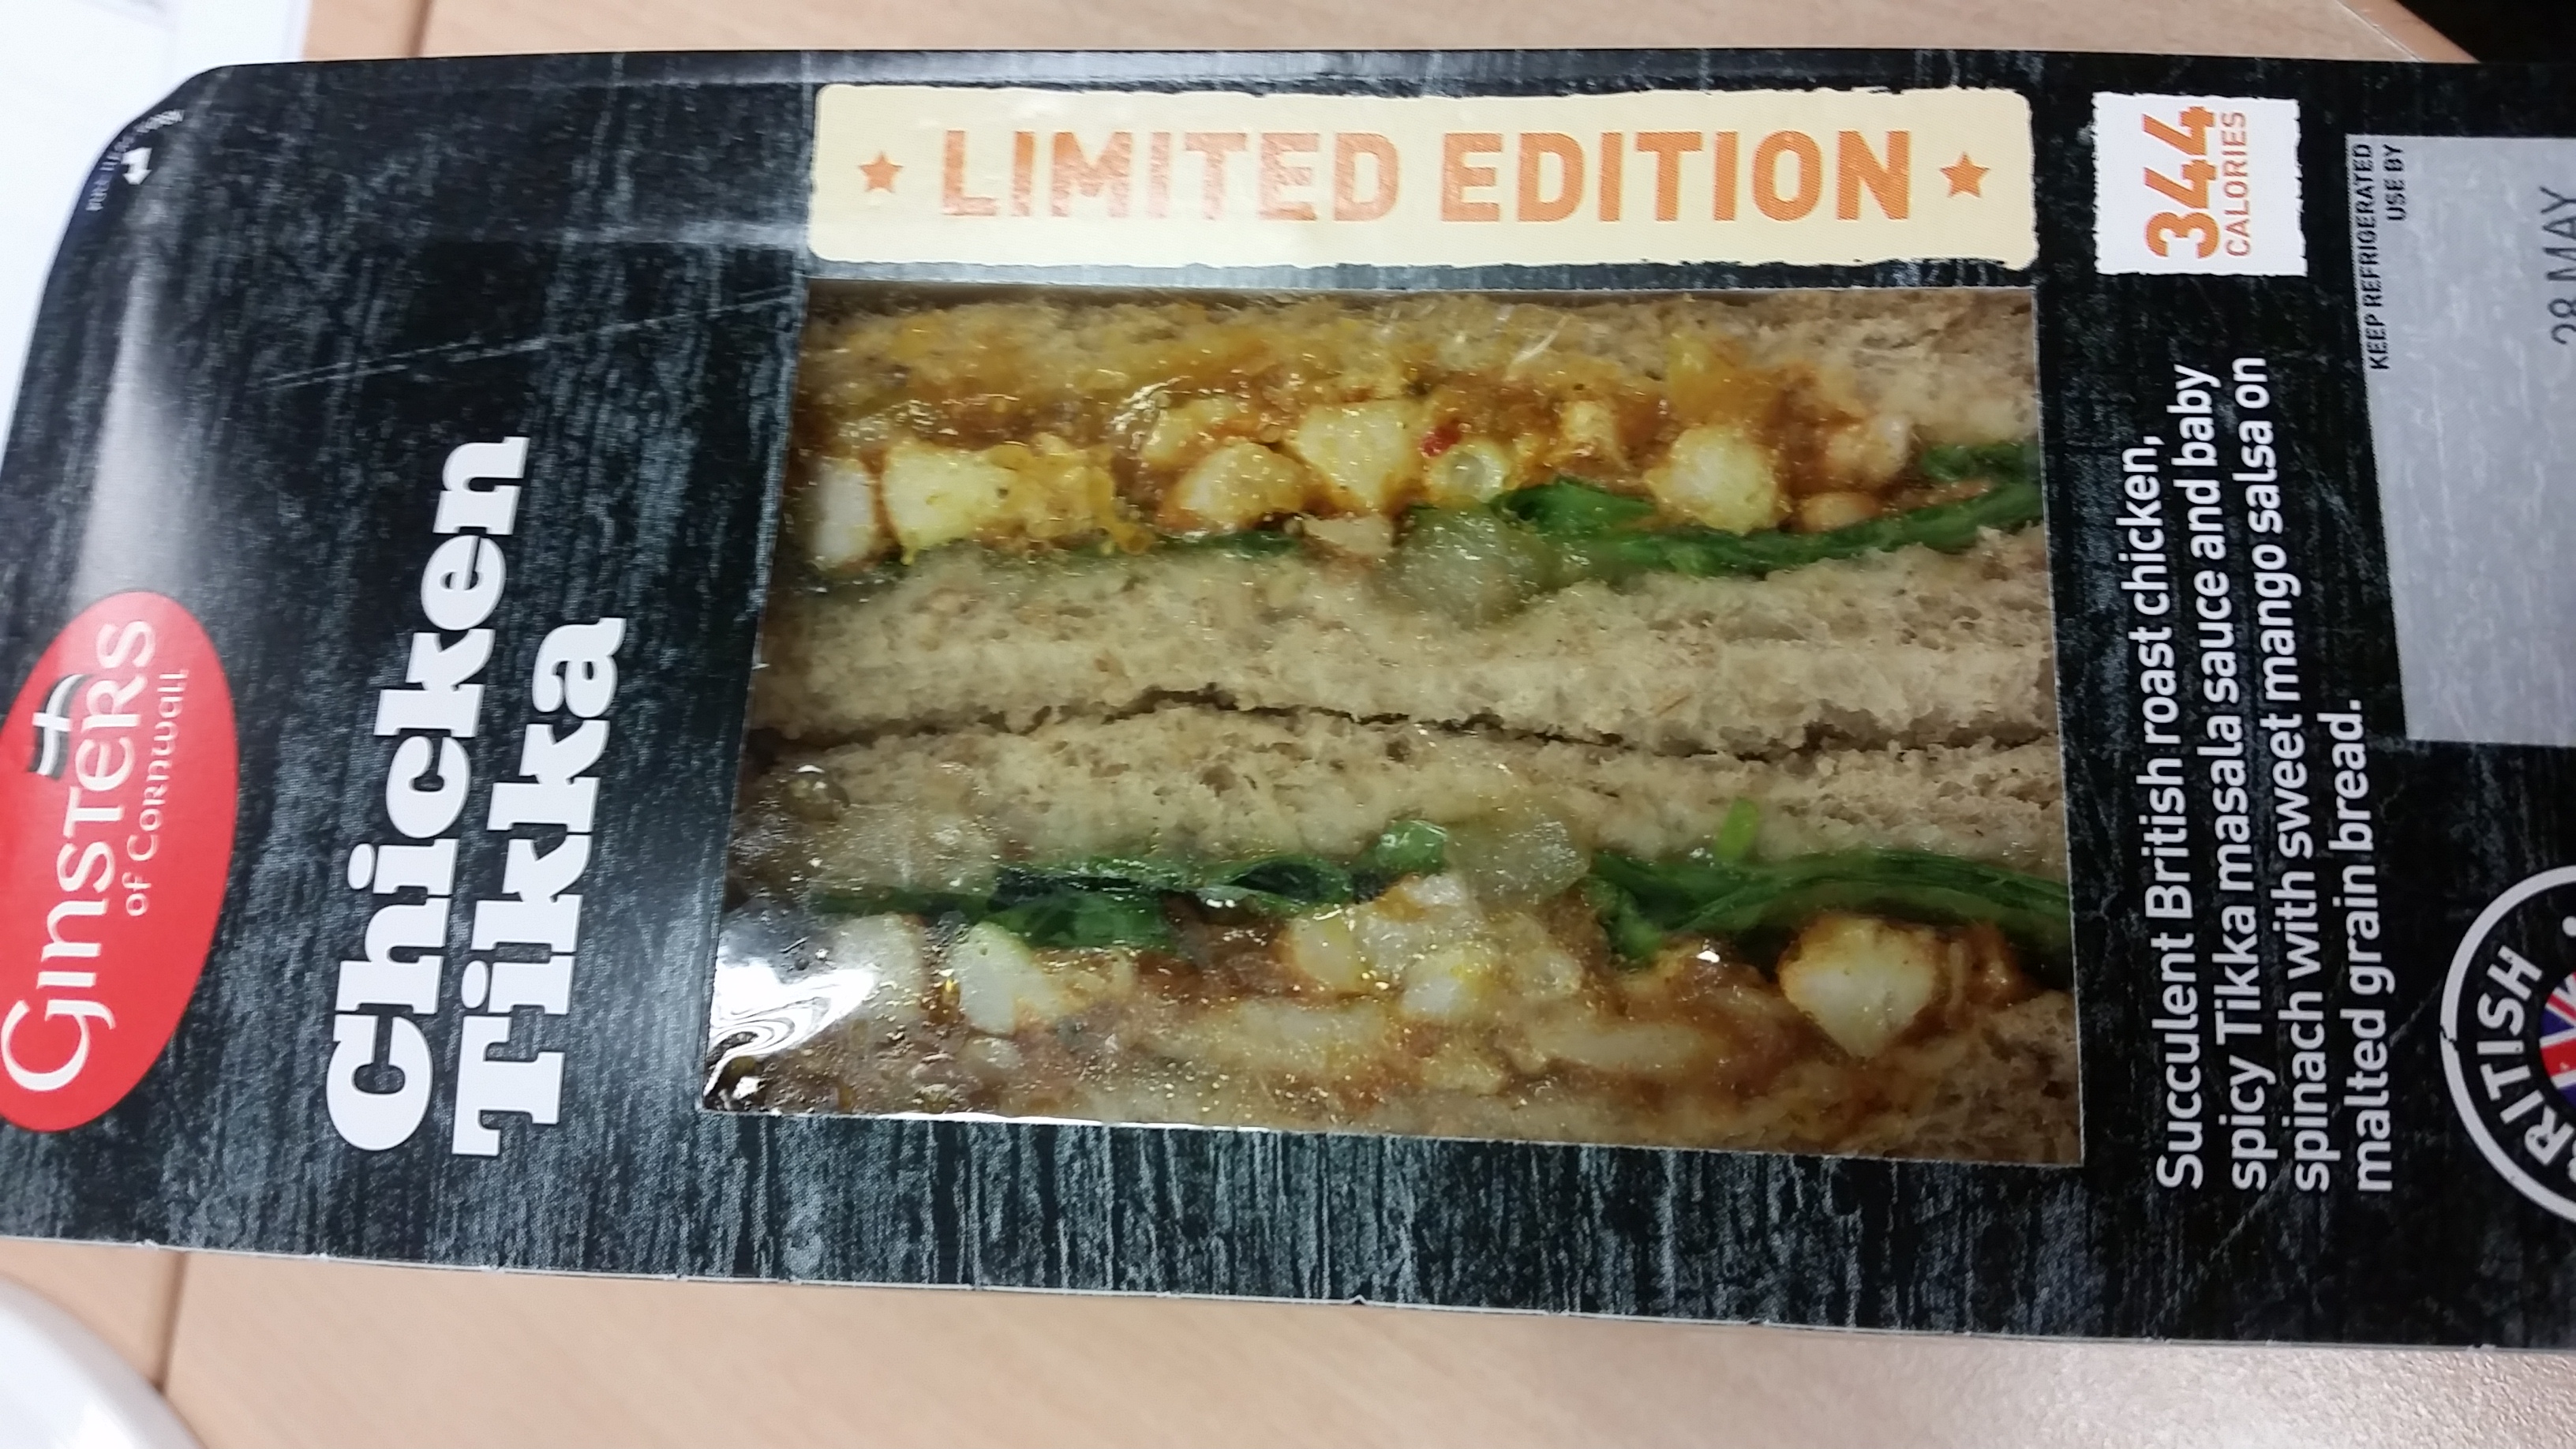 Ginsters new power lunch sandwiches